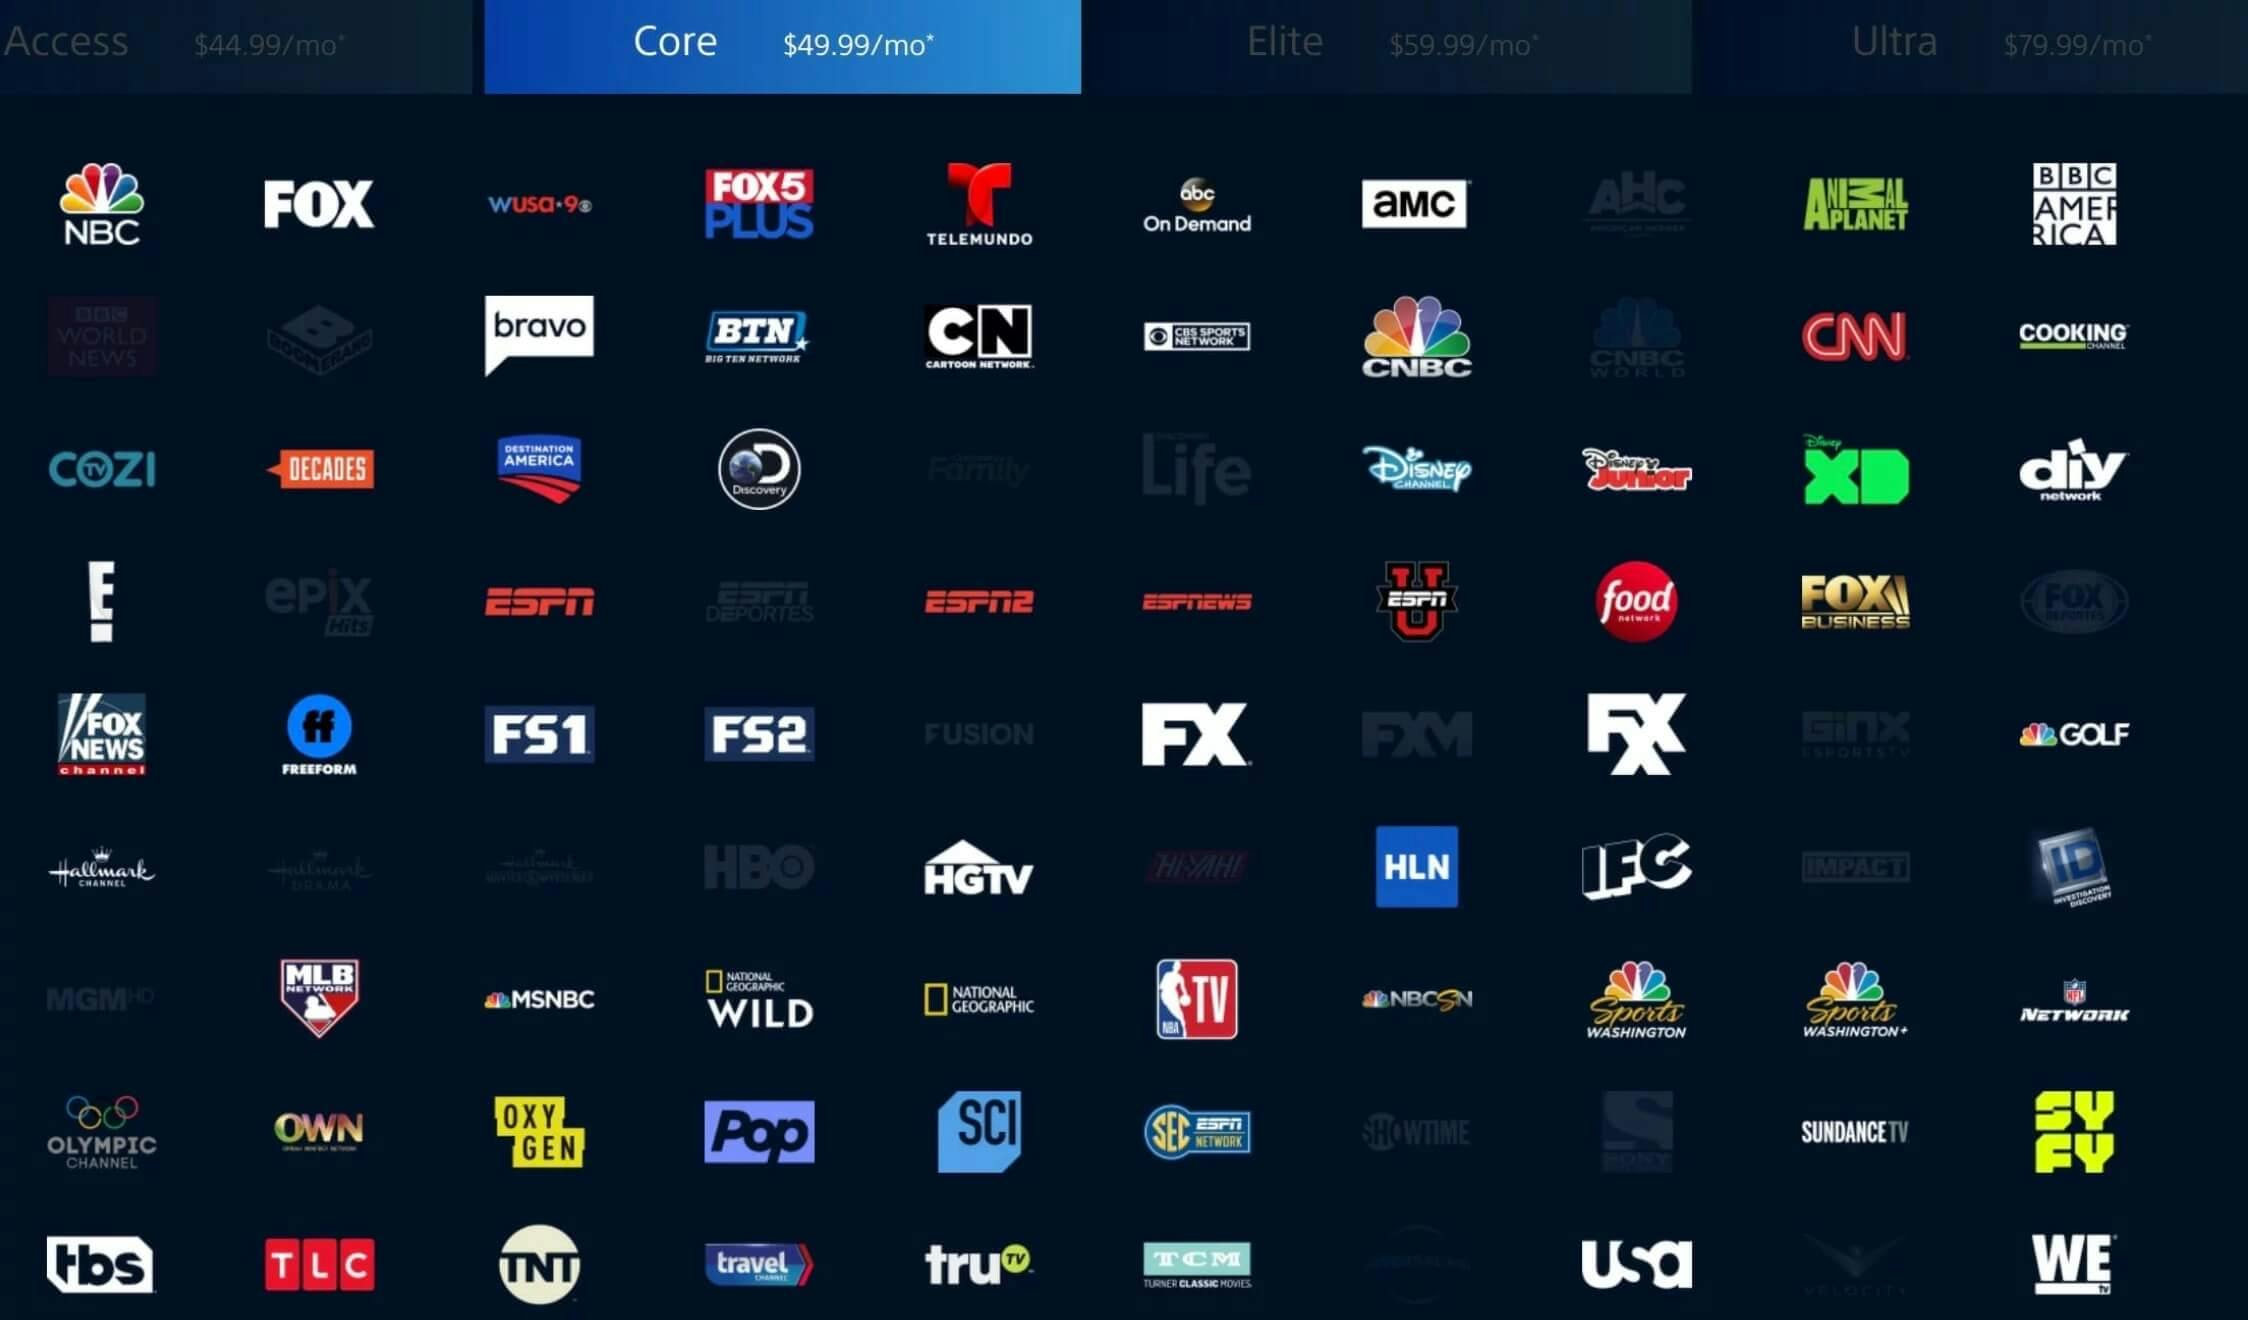 2019-20 premier league manchester united vs liverpool soccer live stream free playstation vue